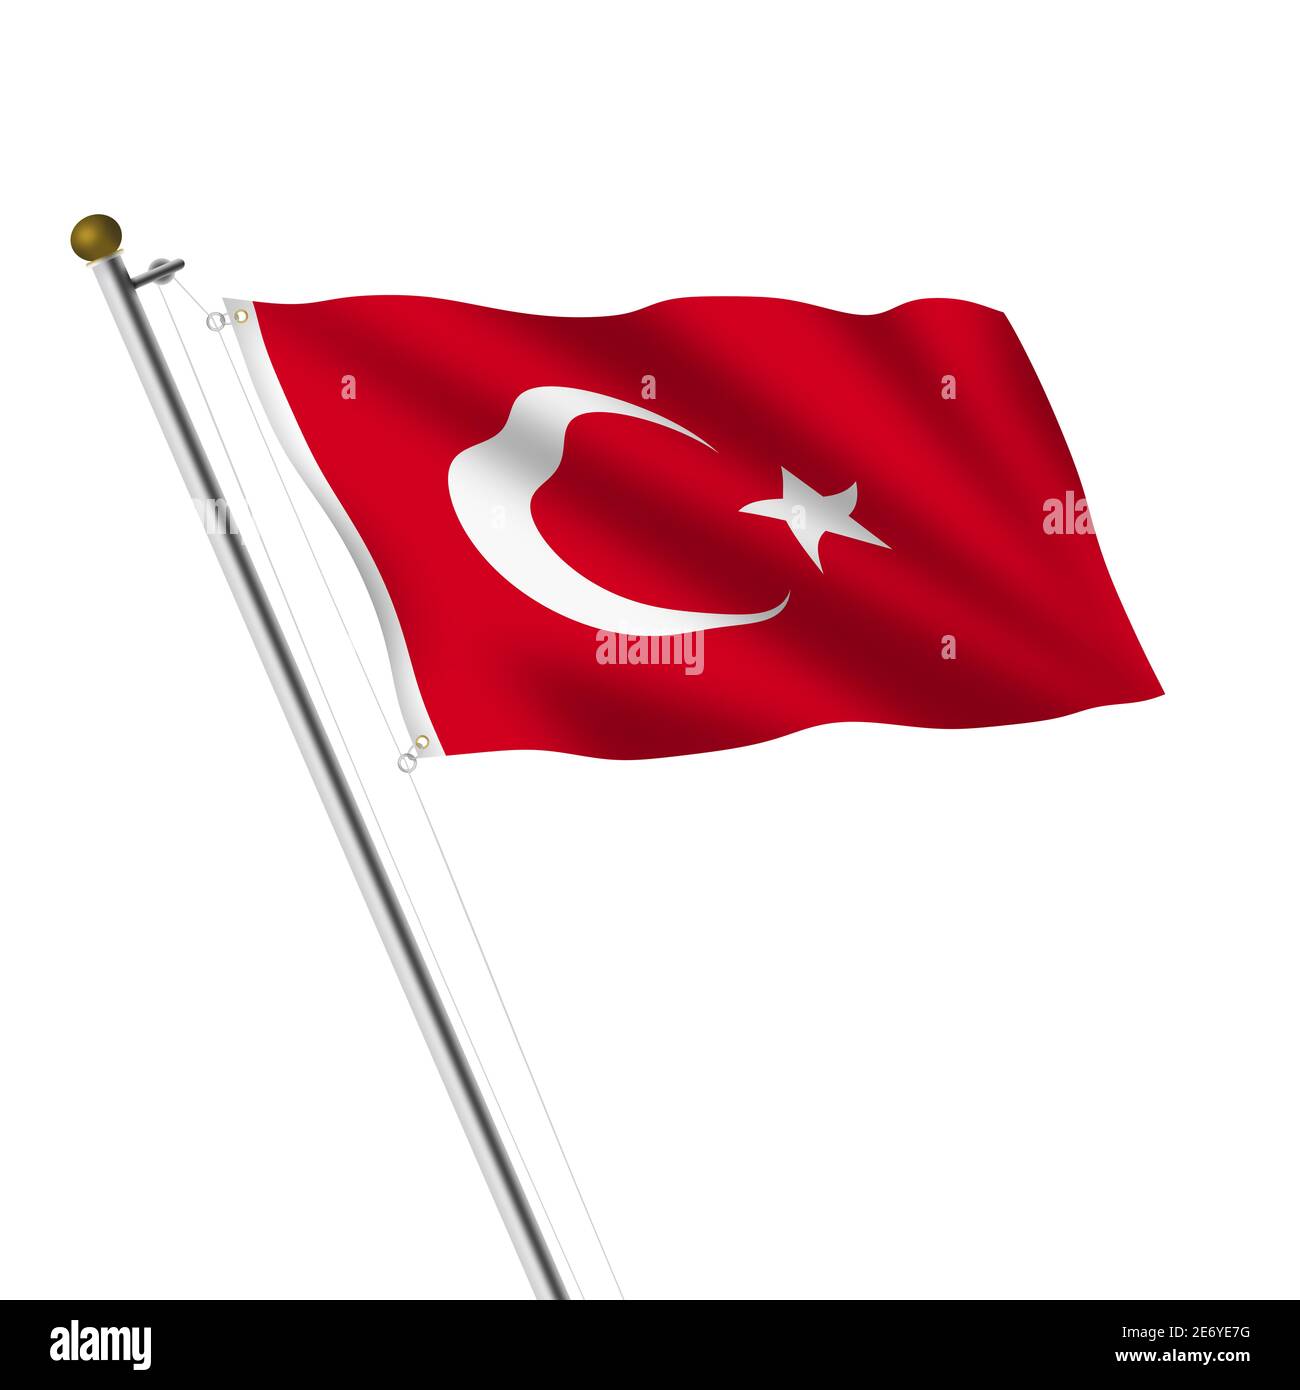 Turkey flagpole 3d illustration on white with clipping path red crescent moon star Stock Photo